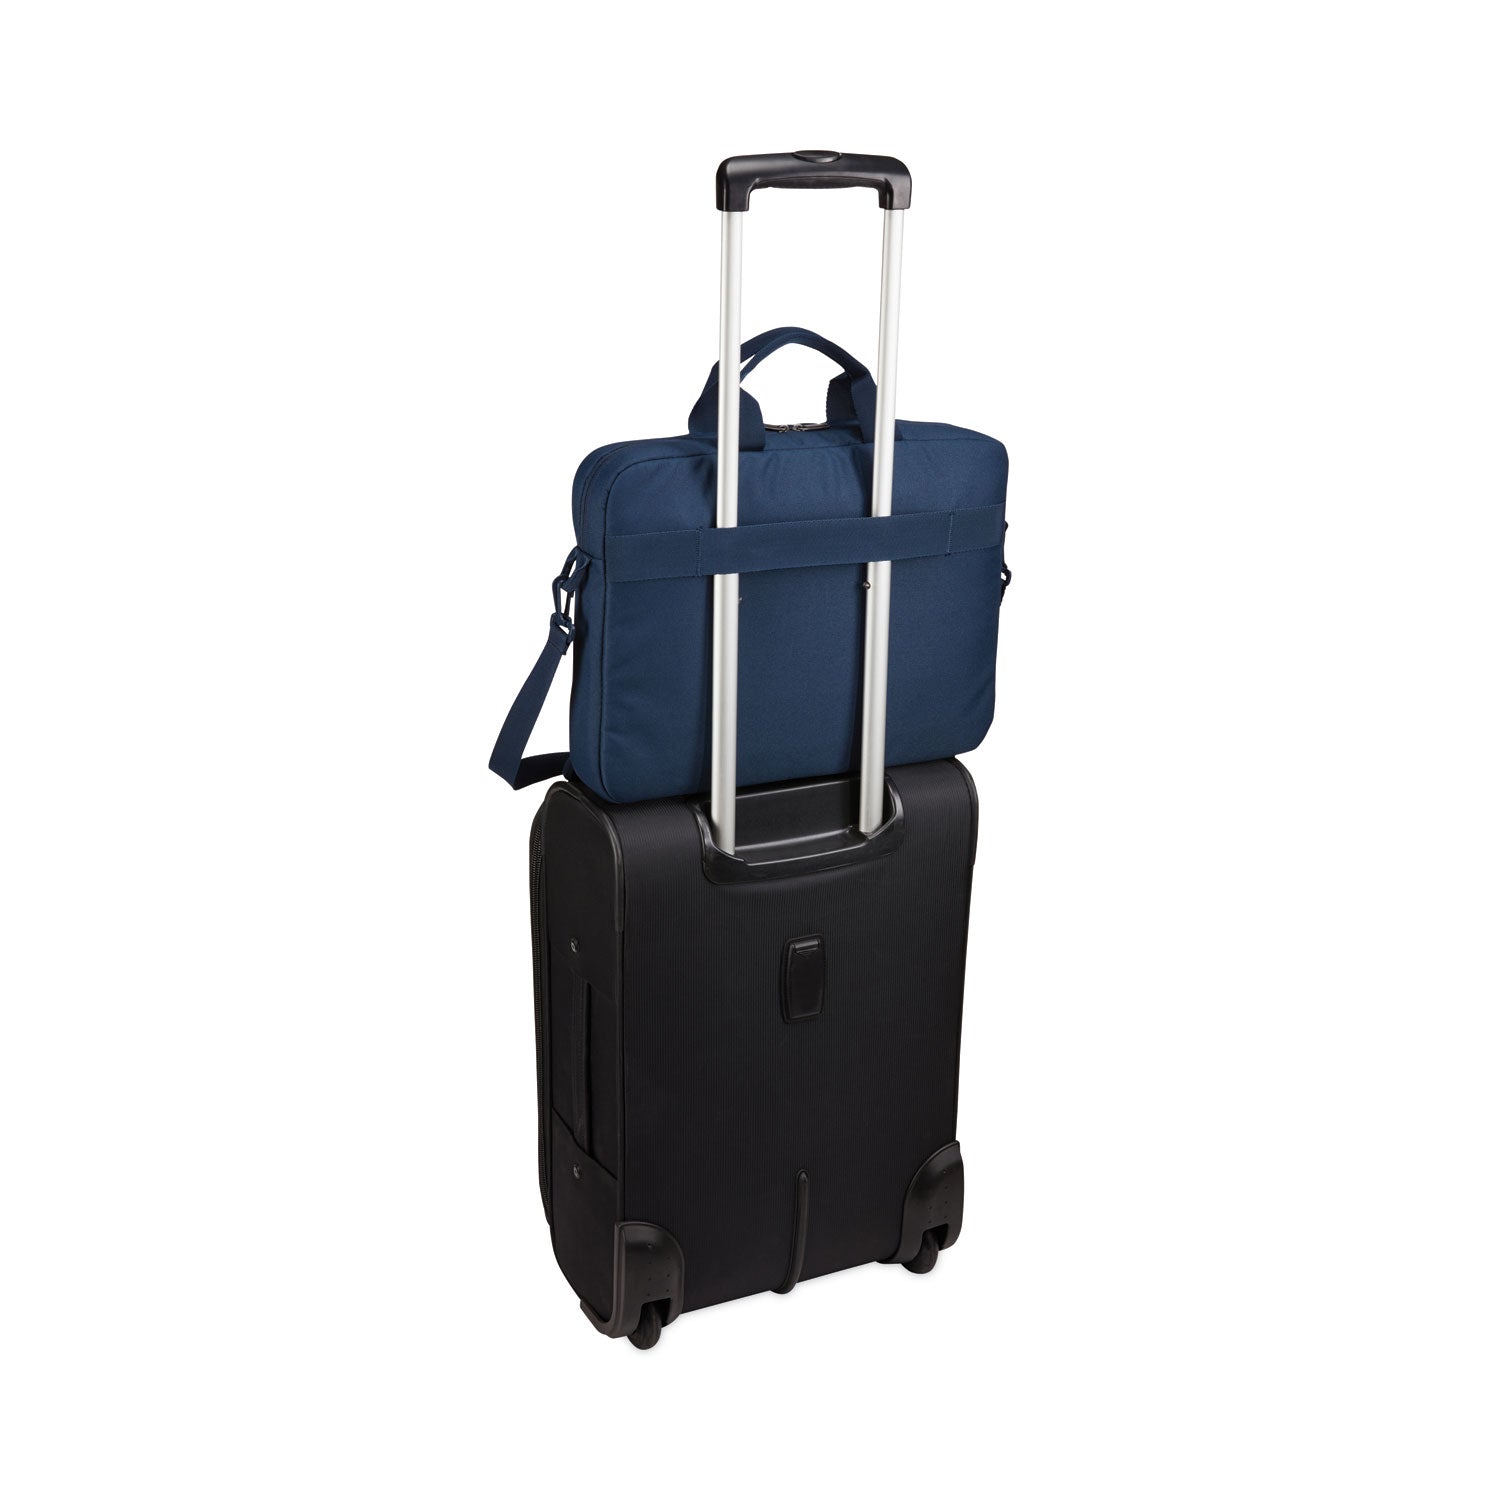 advantage-laptop-attache-fits-devices-up-to-14-polyester-146-x-28-x-13-dark-blue_clg3203987 - 5